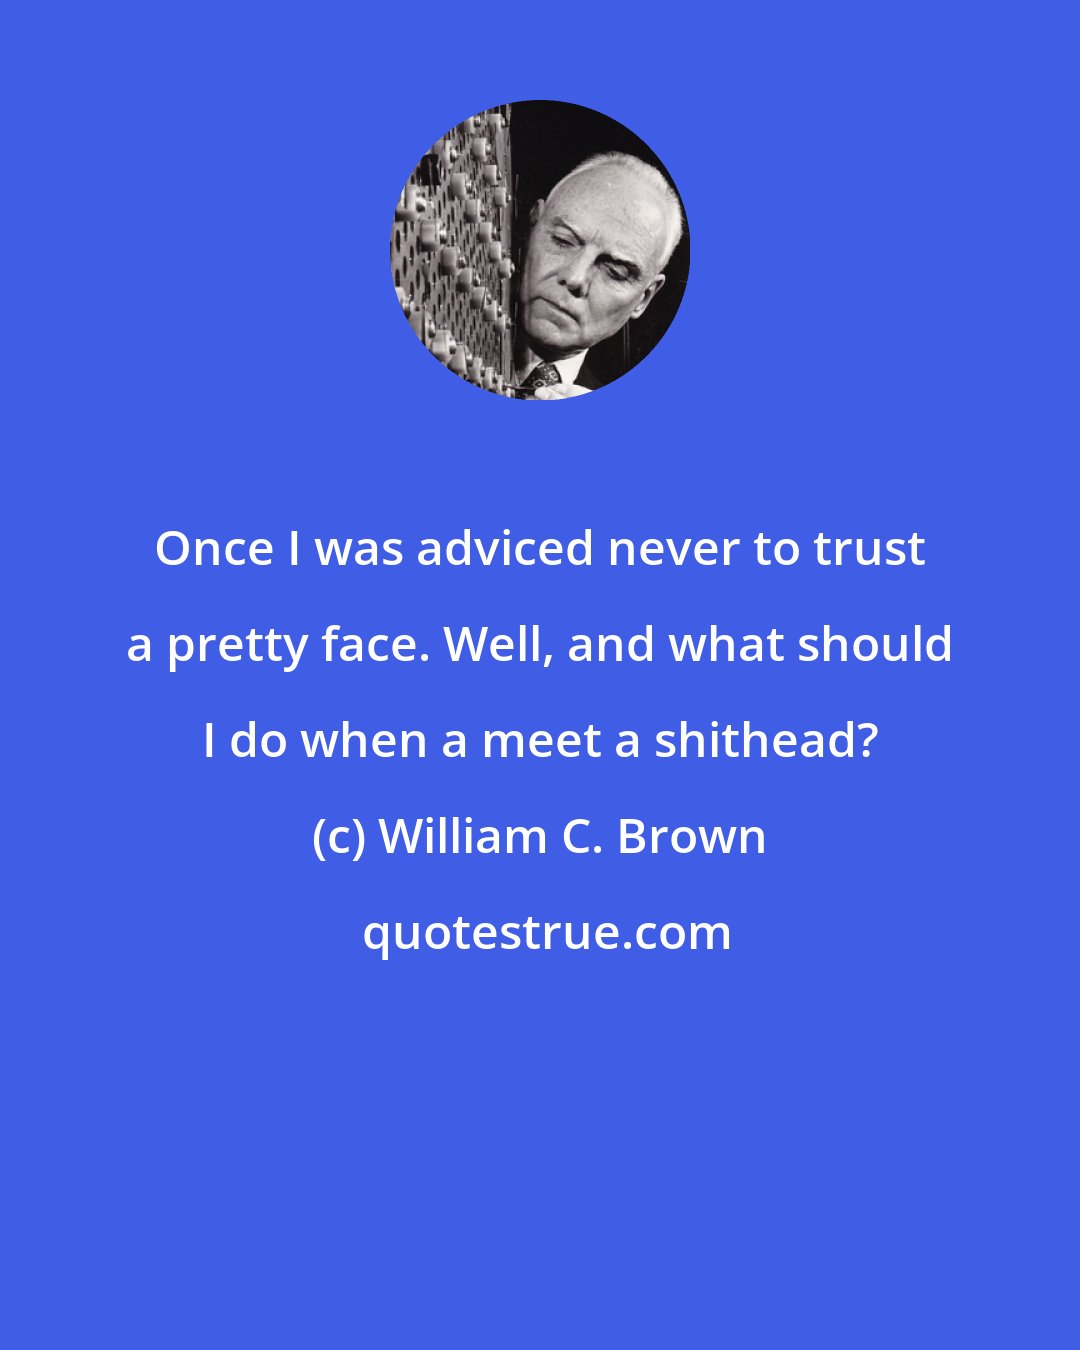 William C. Brown: Once I was adviced never to trust a pretty face. Well, and what should I do when a meet a shithead?